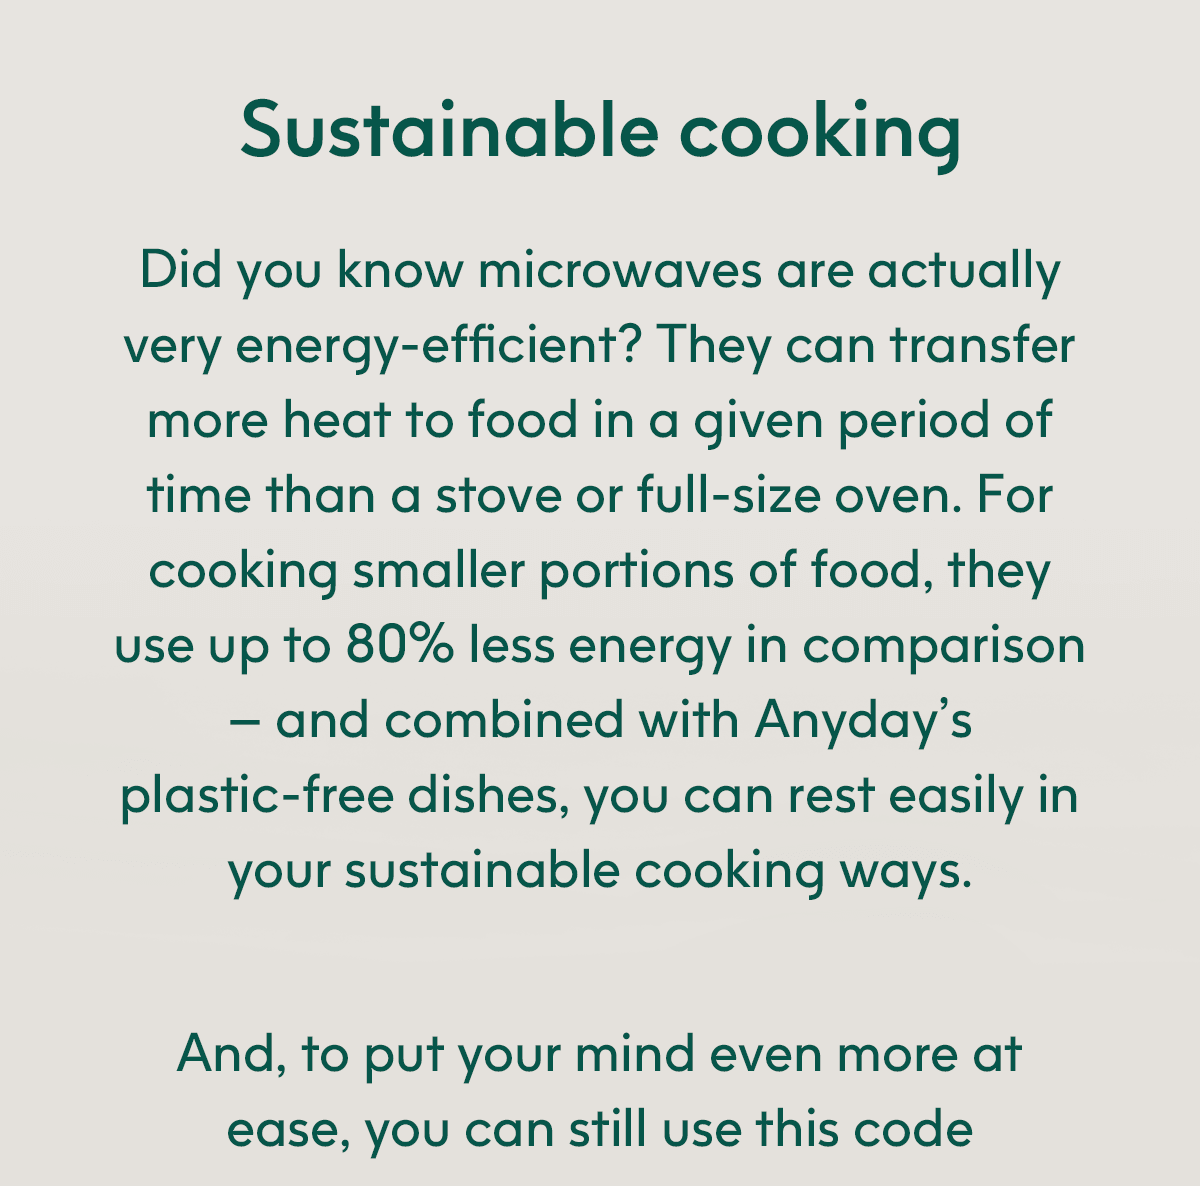 Sustainable cooking